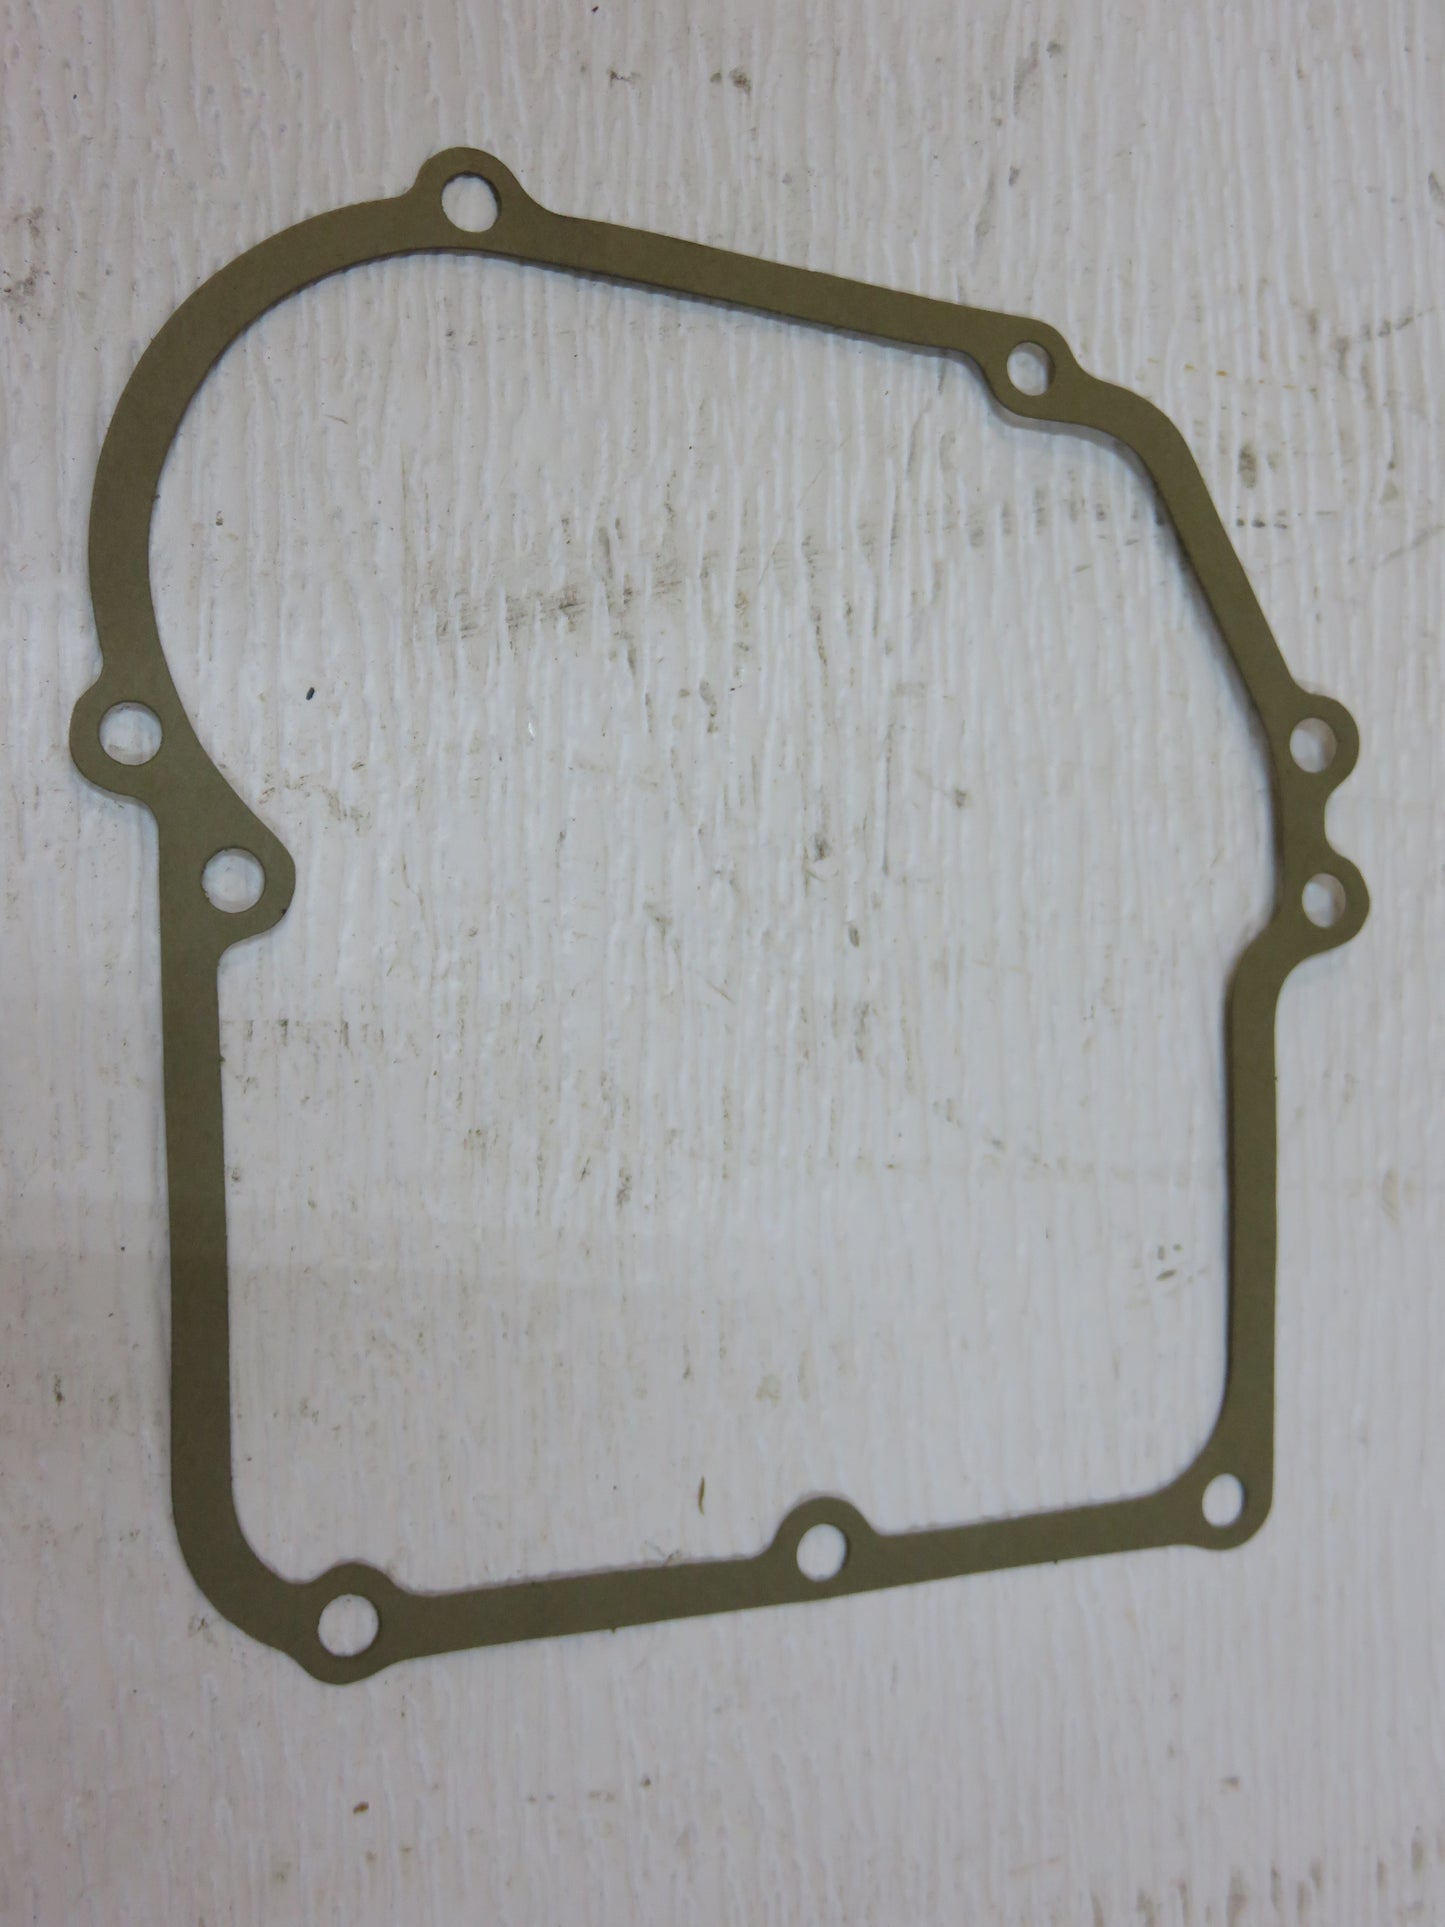 M45713 John Deere Rear Engine Cover Gasket For 520, 824, ,826T, 321, 1026, 1028, Snow Blowers